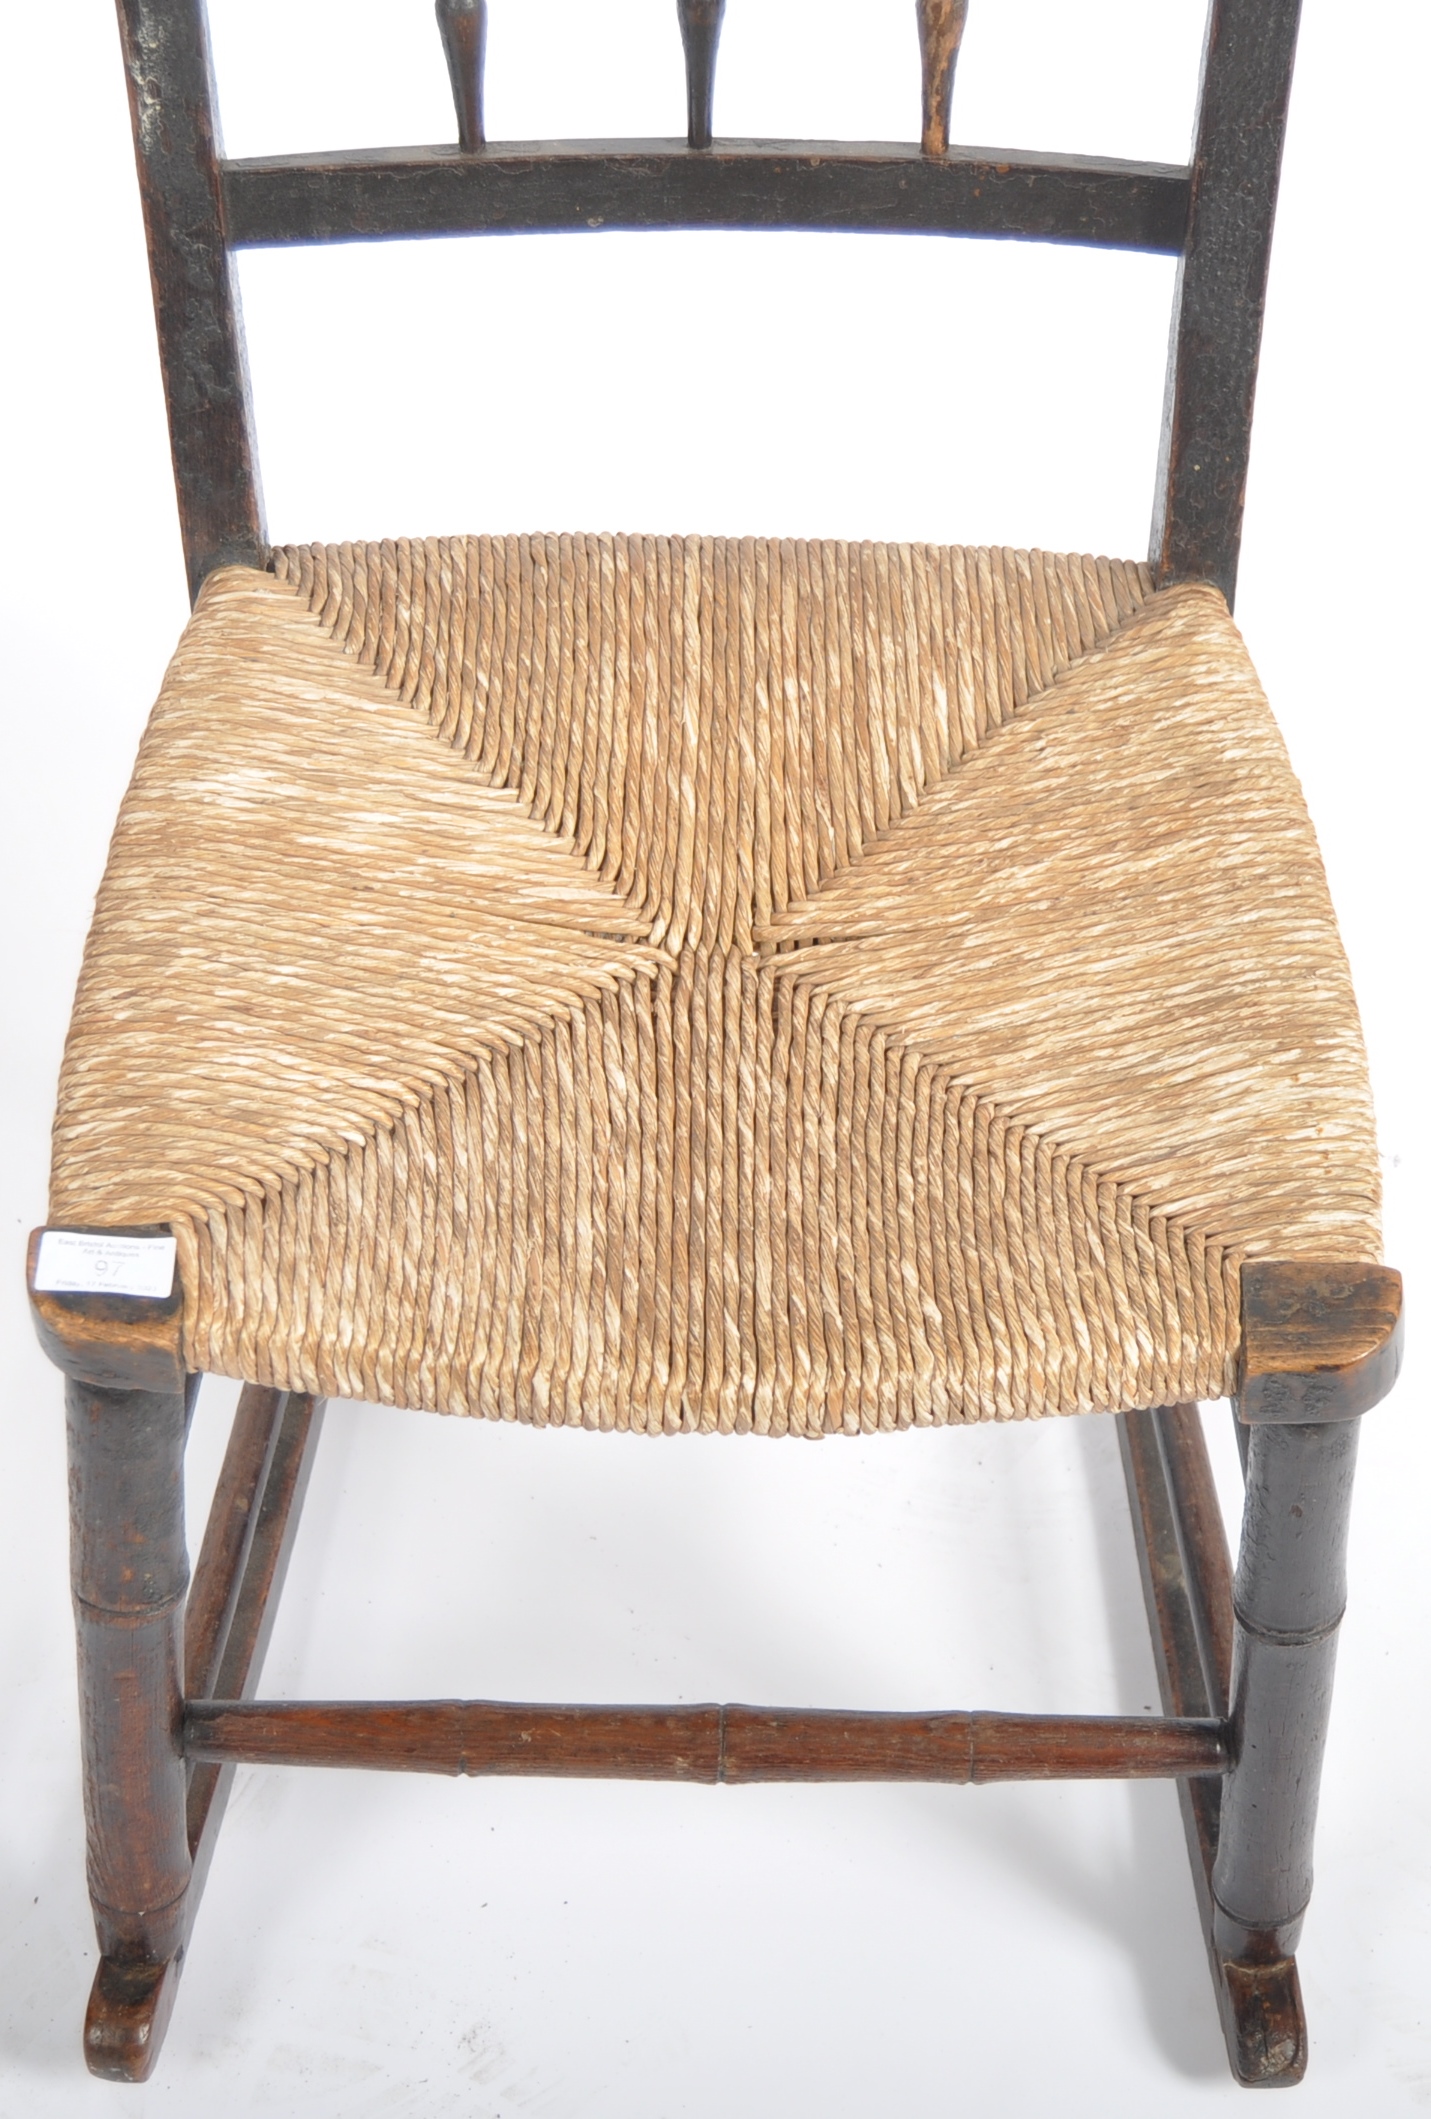 19TH CENTURY CHILDS ROCKING CHAIR - Image 5 of 6